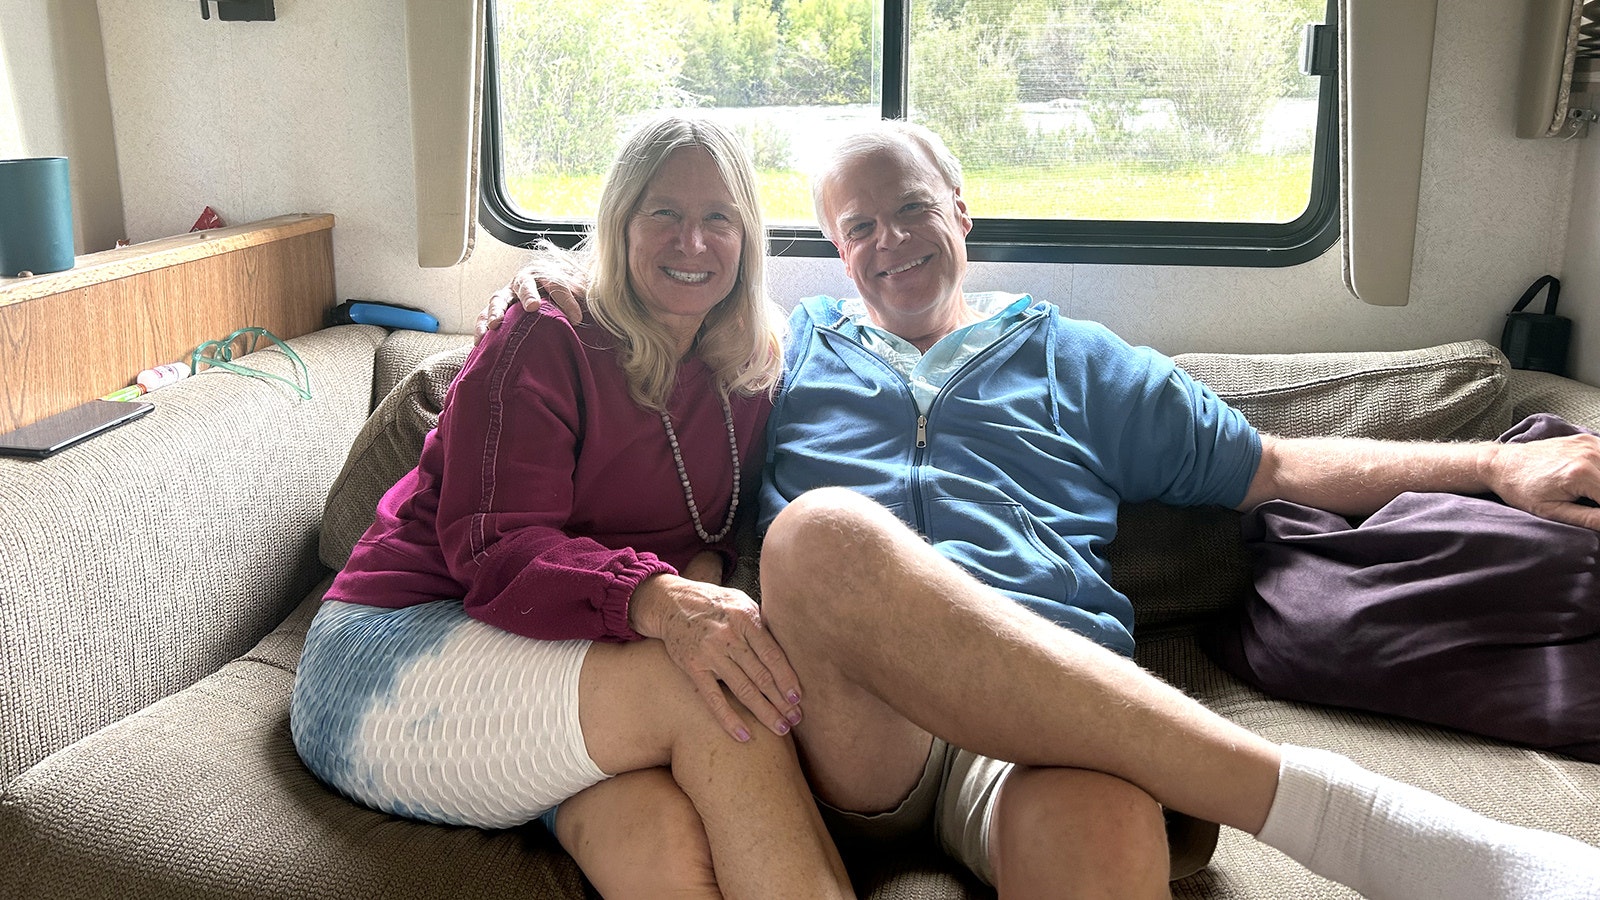 Carmen and John Campa in their RV home. They live simply off-grid, and love spending much of their summers in Wyoming.